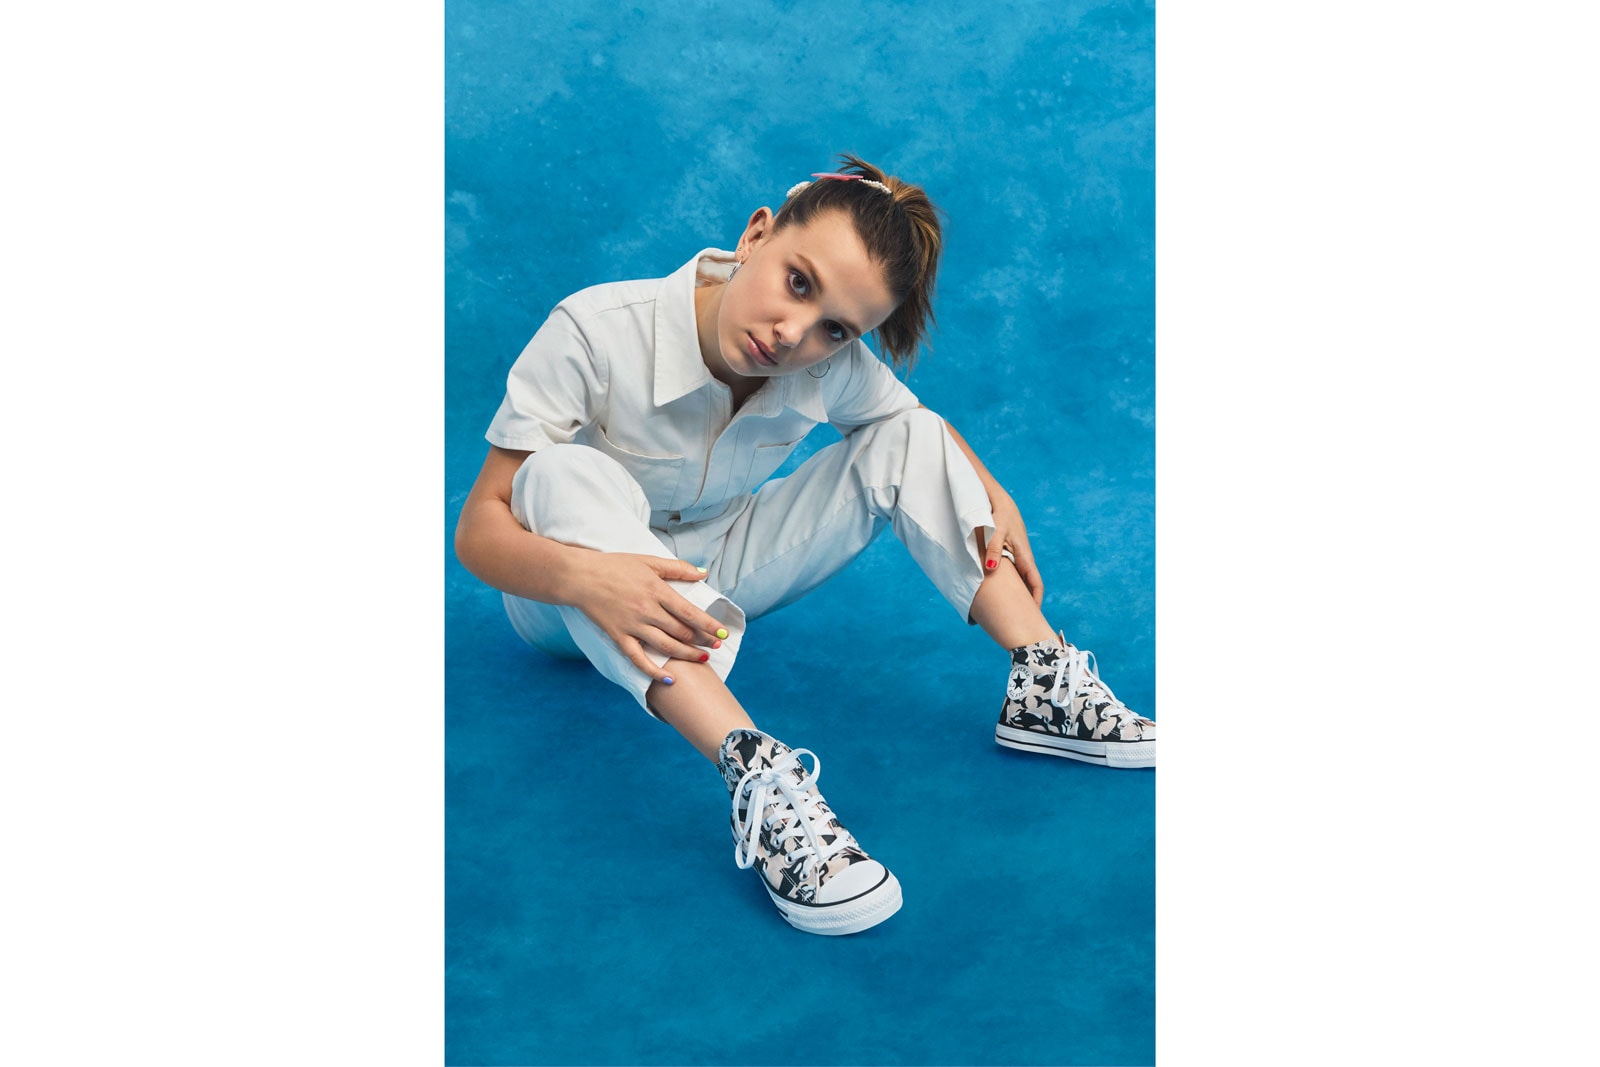 Millie Bobby Brown x Converse By You Chuck Taylor All Star Hi Whale Blue Pink Yellow Sneaker